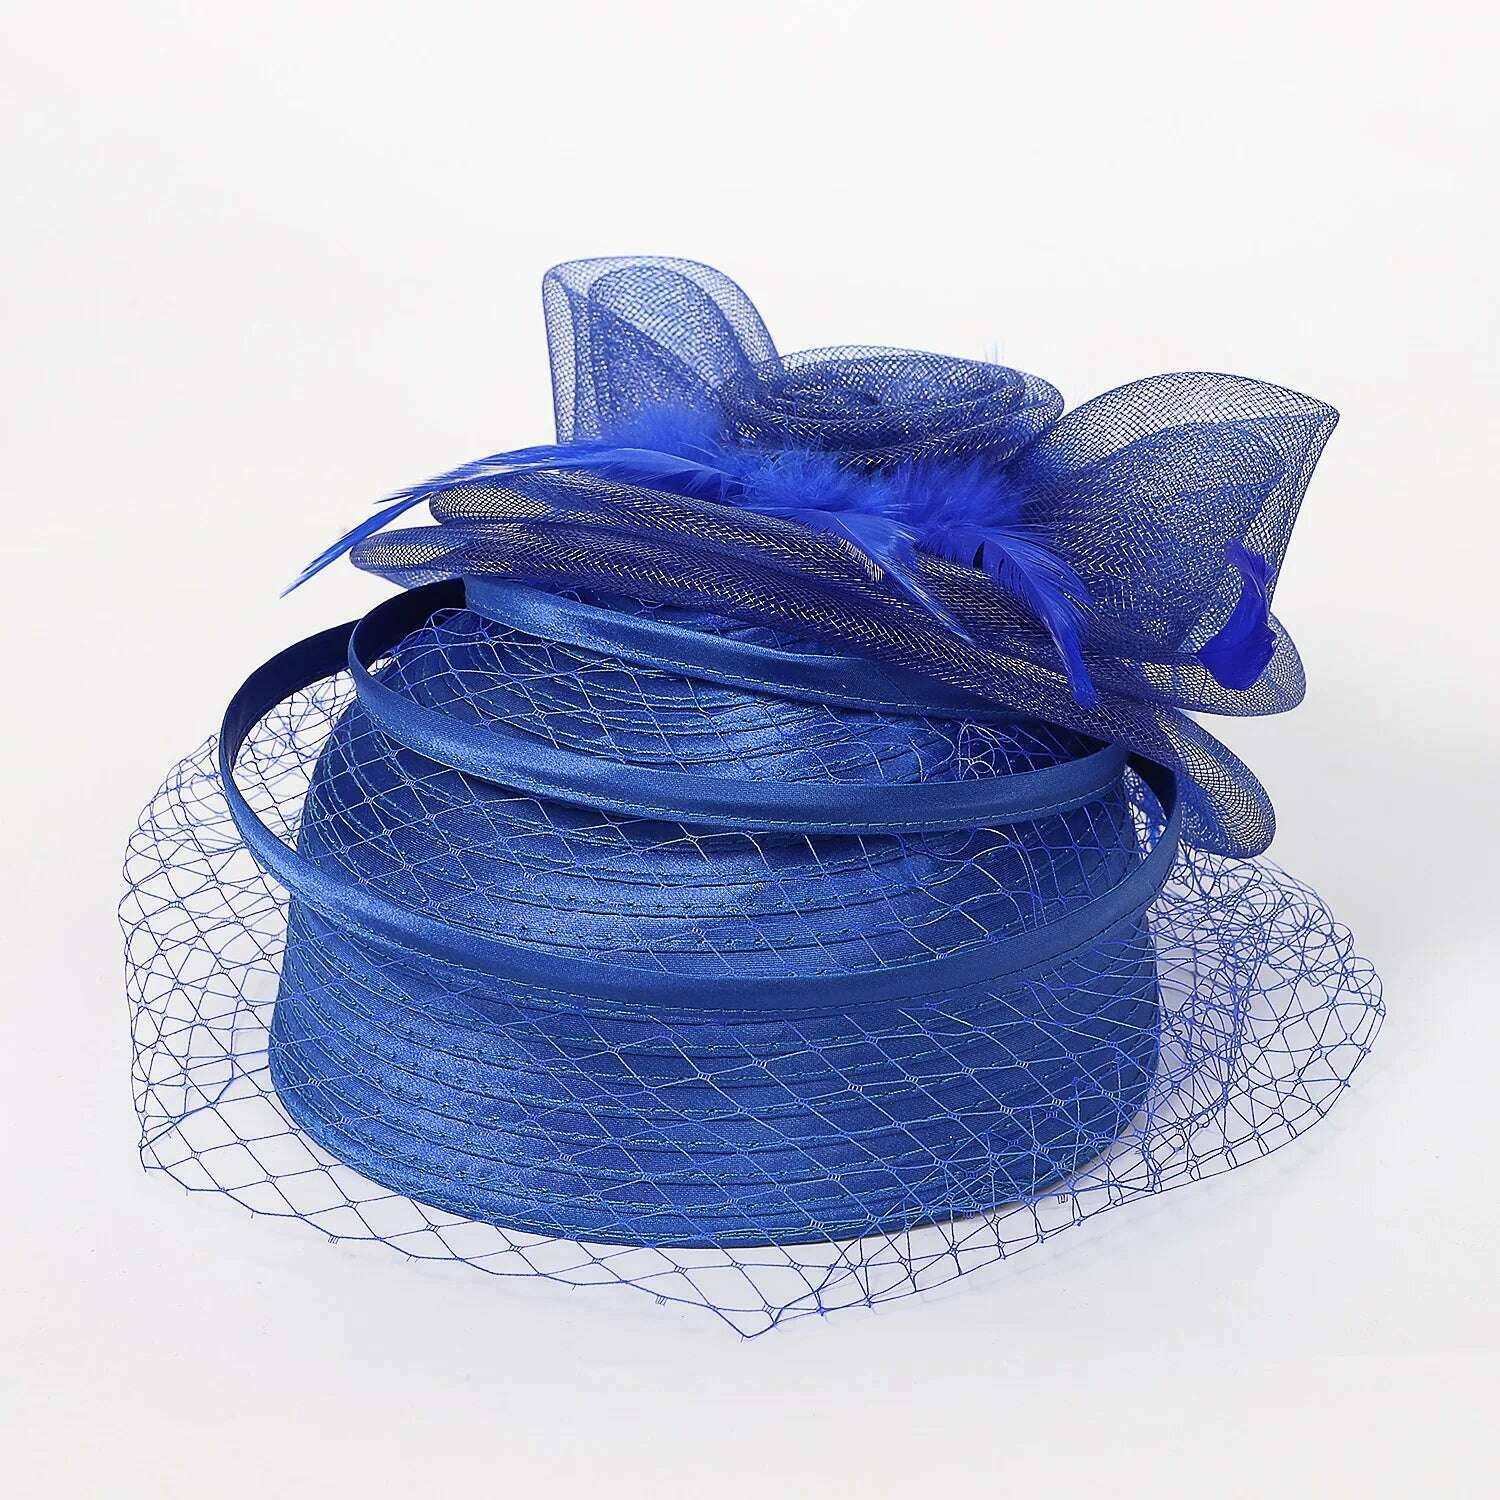 KIMLUD, FS 2023 Wedding Church Red Hats Fascinators For Woman With Feather Veil Cocktail Party Headdress Lady Elegant Kentucky Derby Cap, Royalblue / 54 to 56cm, KIMLUD Womens Clothes